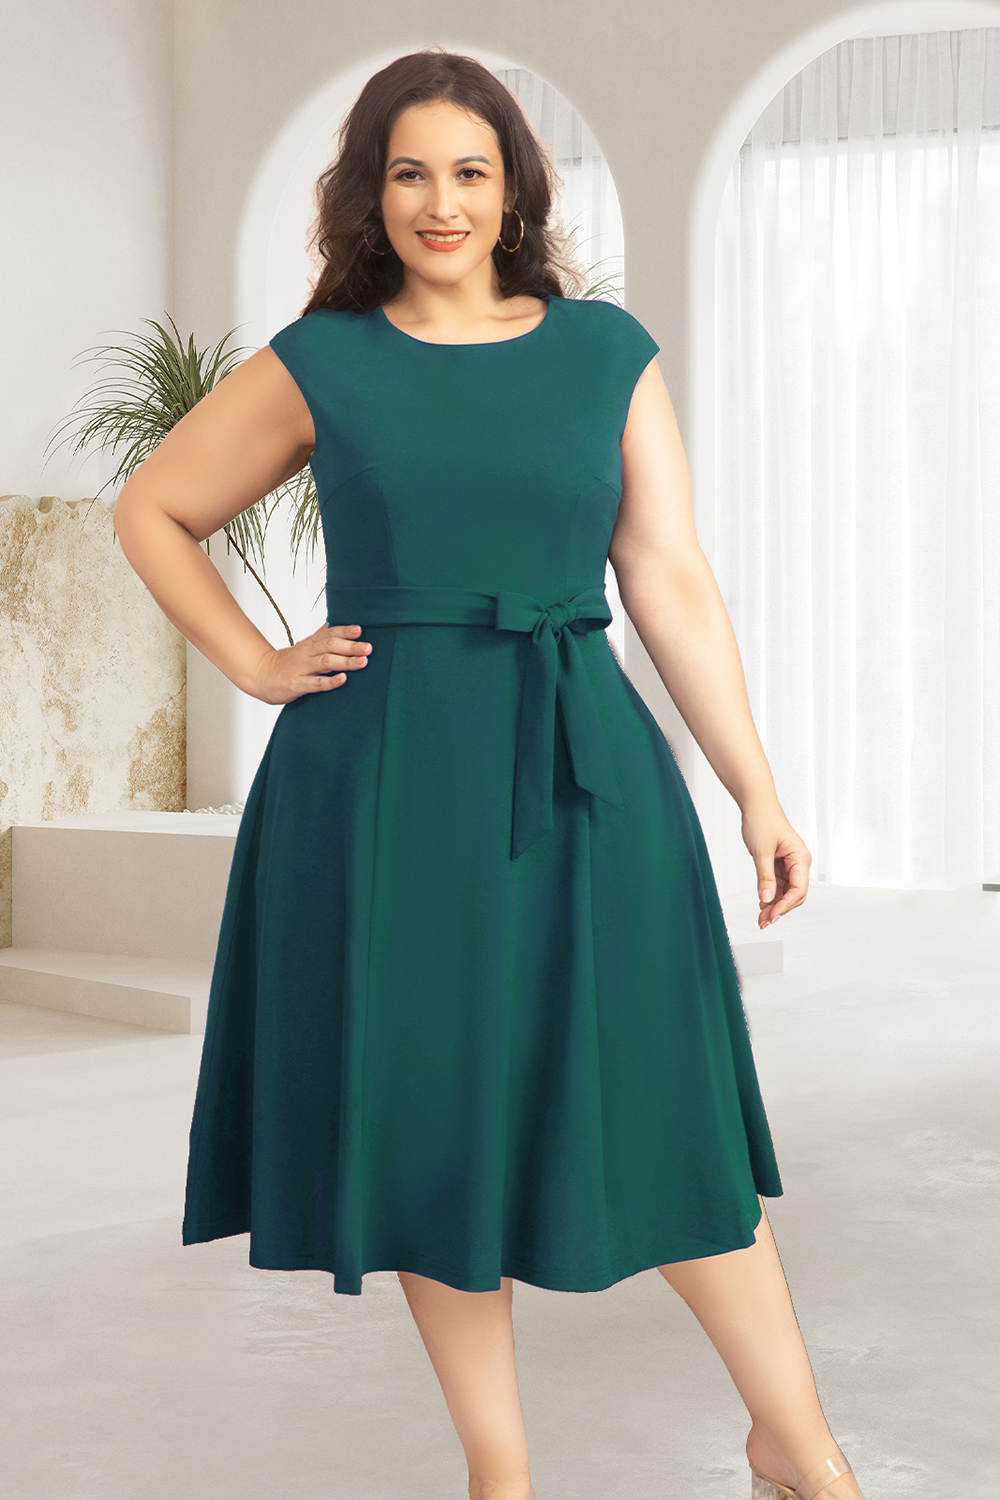 A-Line Knee-Length Turquoise Cocktail Dress with Cap Sleeves, Vintage Style, Unique and Elegant